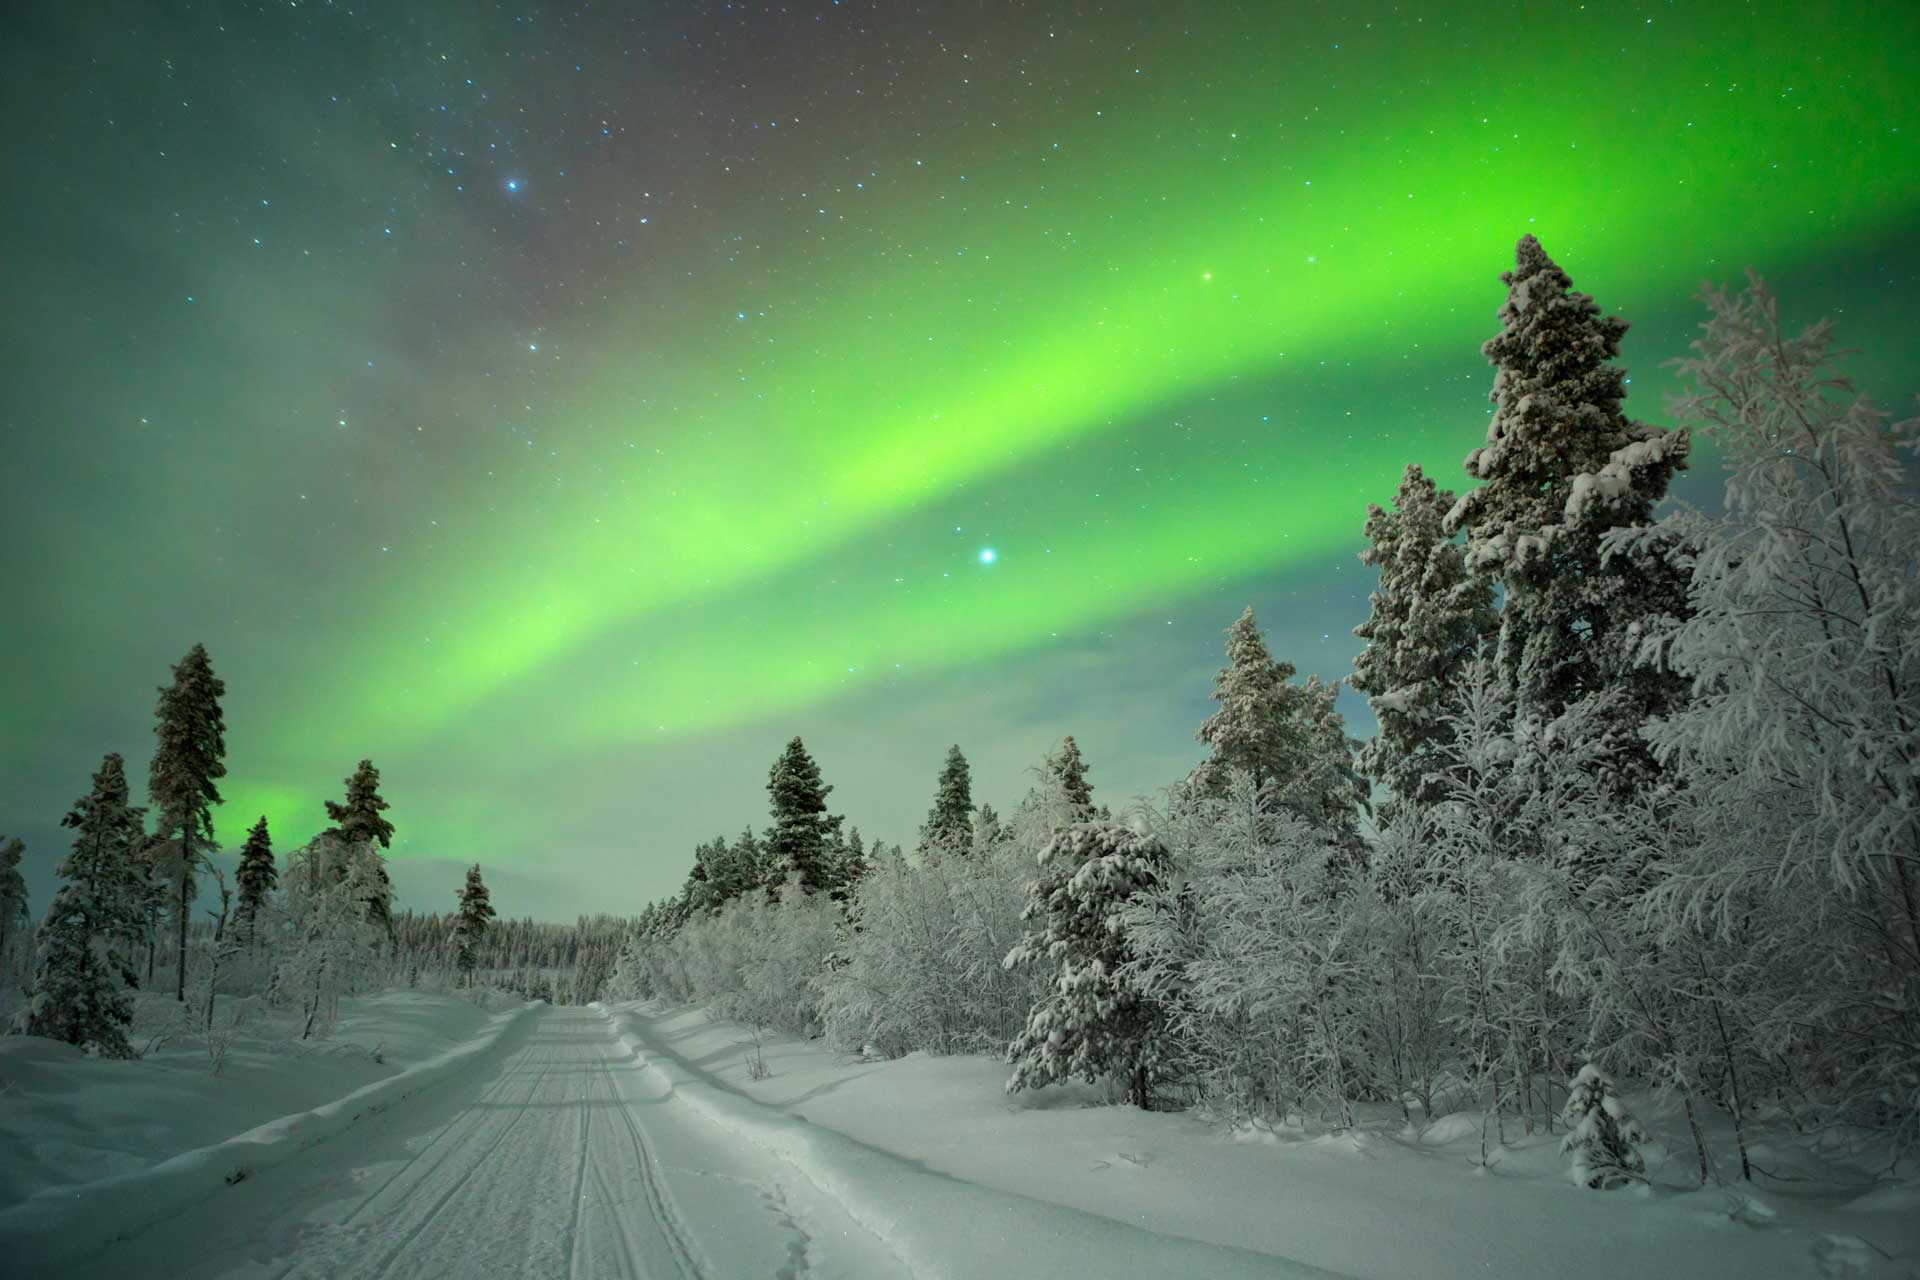 The Northern Lights glowing above a white forest in Finnish Lapland